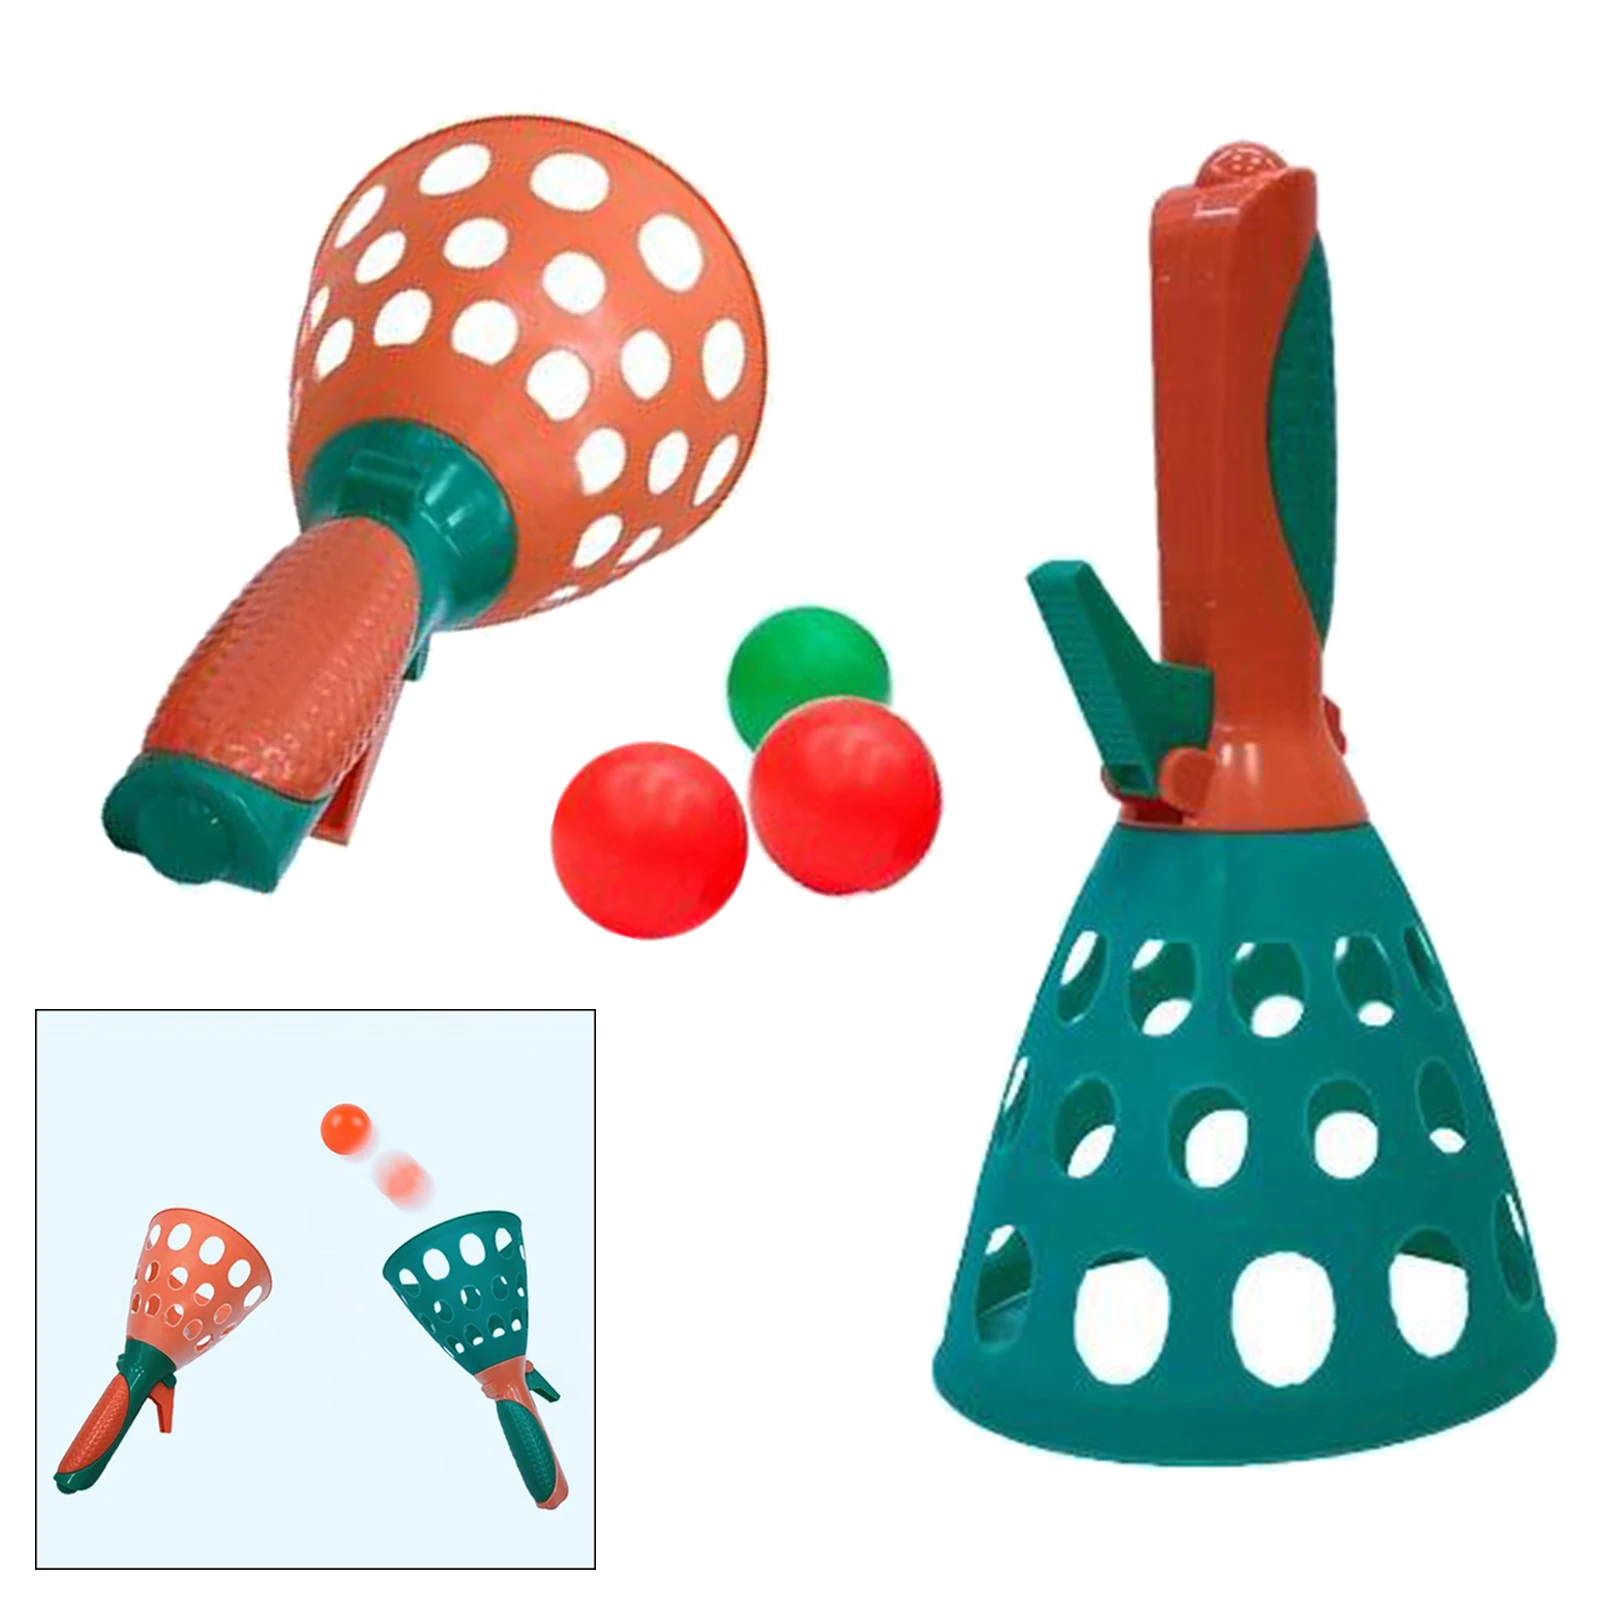 Details about   Kids Launch Catch Ball Game Set Outdoor Garden Toy Set   Catch Ball for Yard